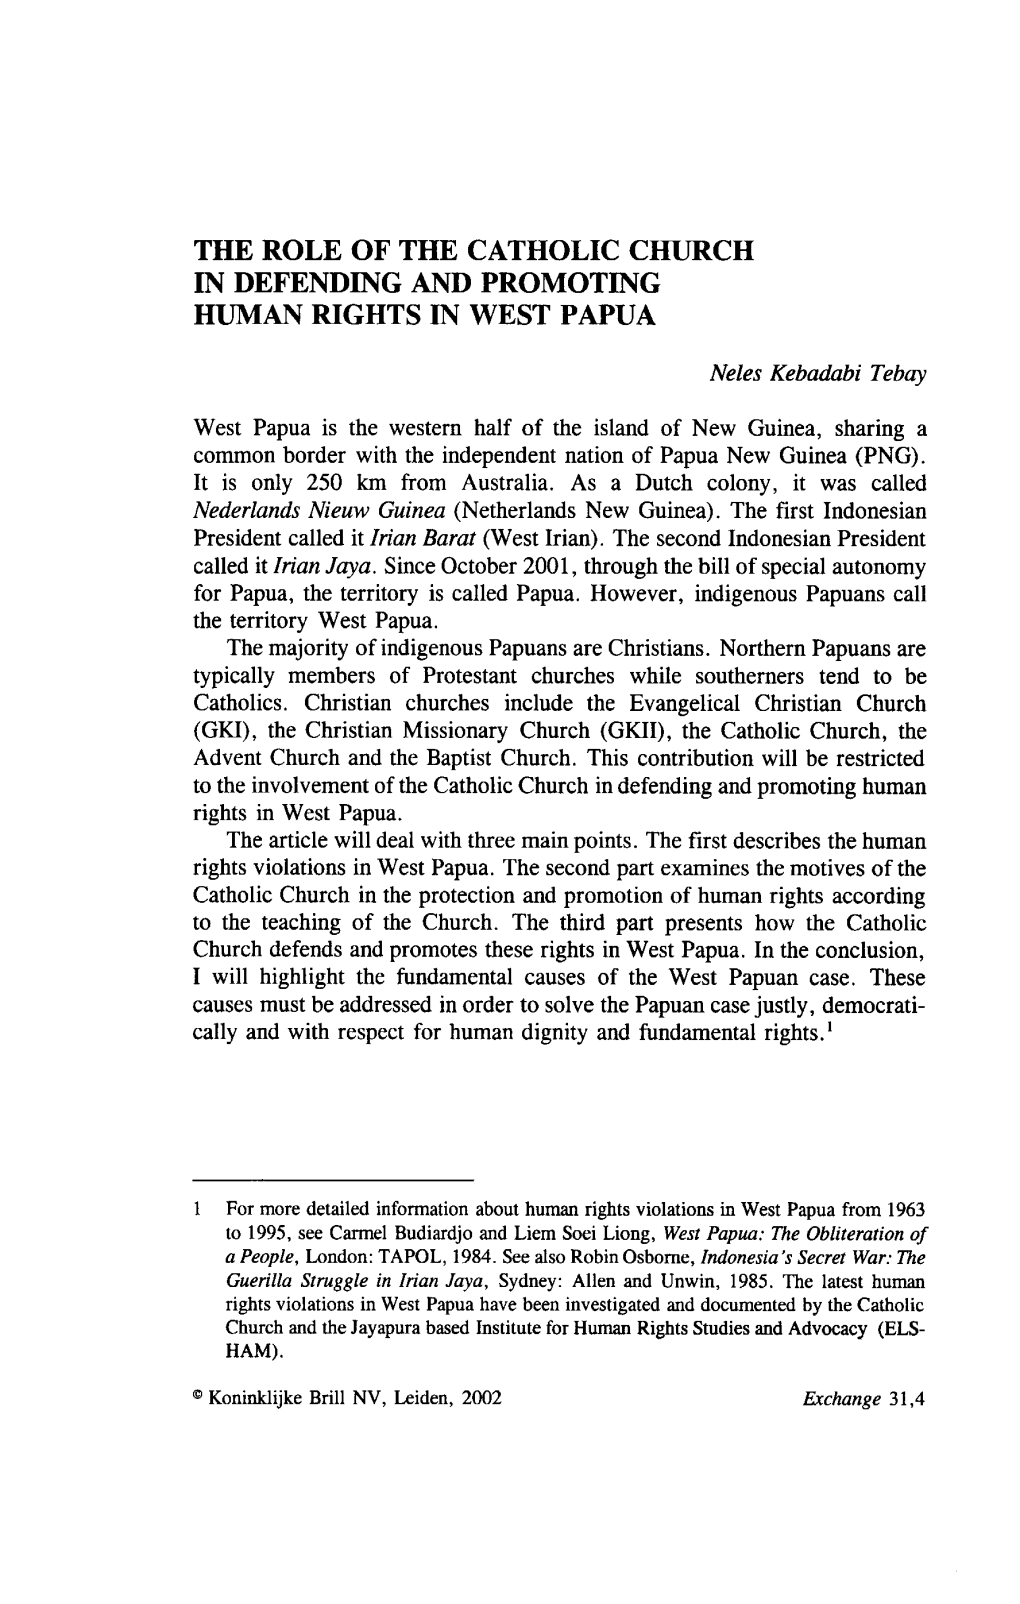 The Role of the Catholic Church in Defending and Promoting Human Rights in West Papua